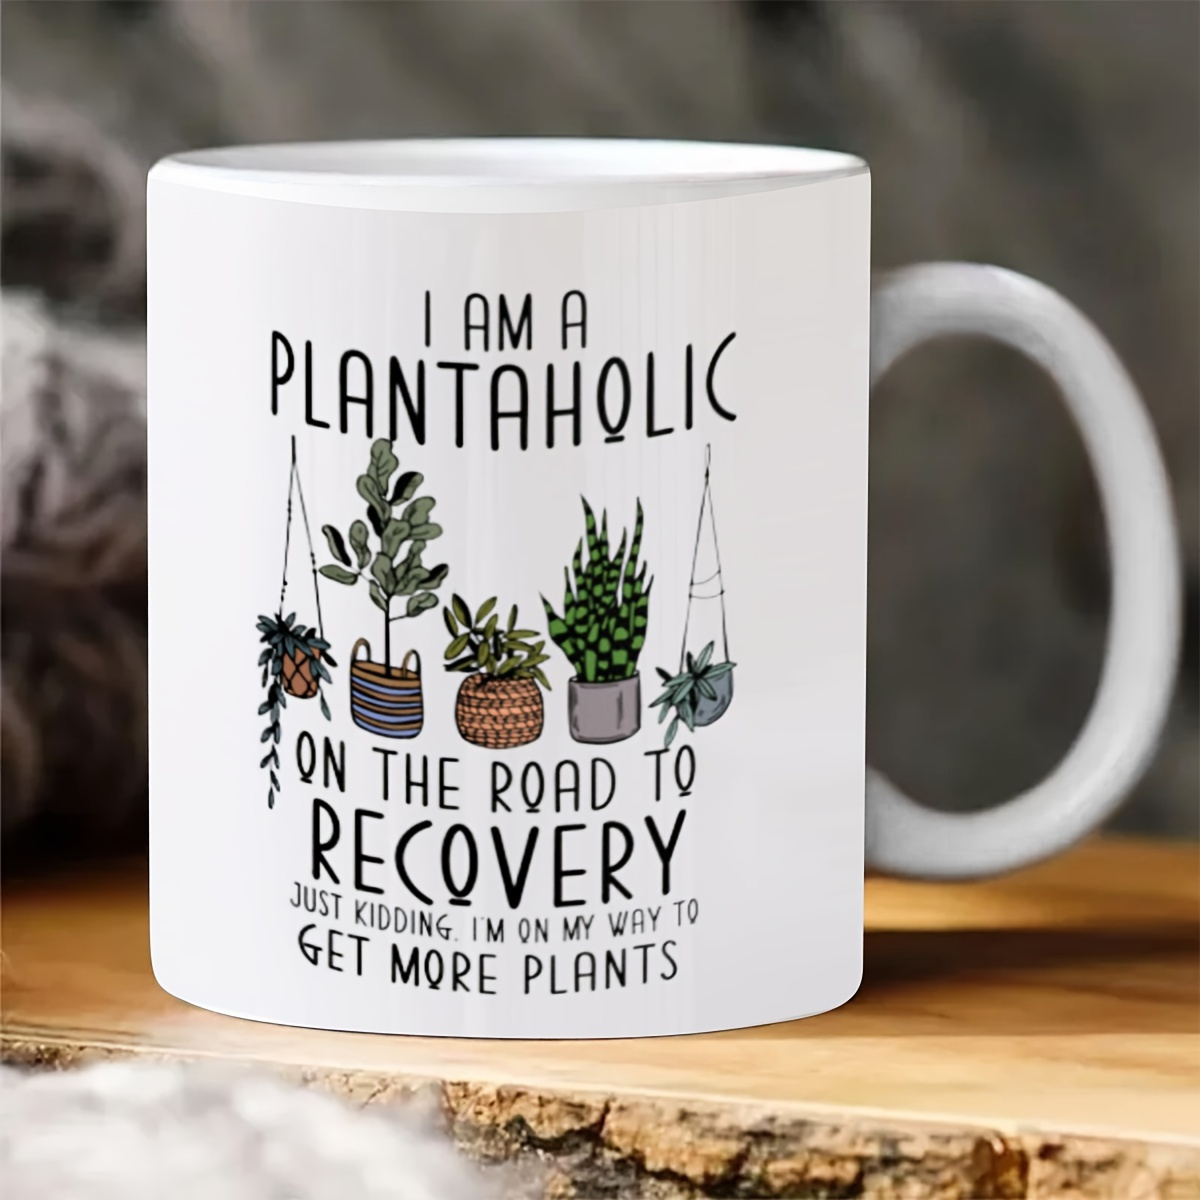 

1pc, Funny Coffee Cup, Ceramic Cup, Double-sided Design, Tea Coffee Cup, Ironic Cup, Gardening, Flower Plant Lovers, Colorful Hobby Cup, Nature, Coffee Cup, Tea Cup, Home Decoration, Gift